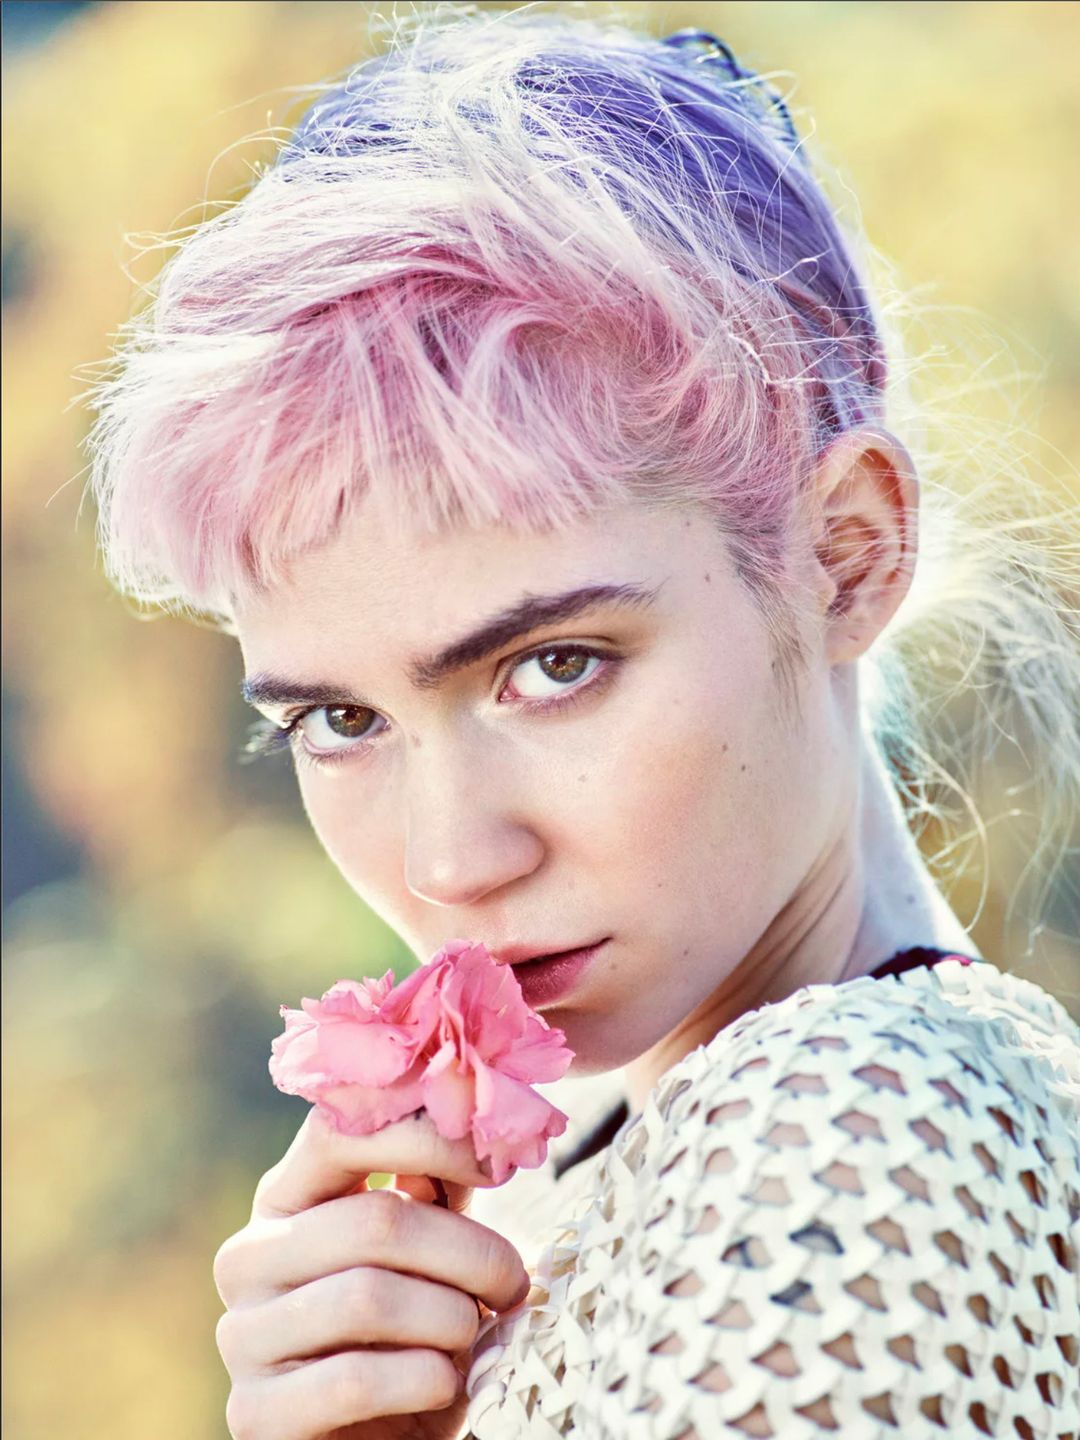 Grimes early career